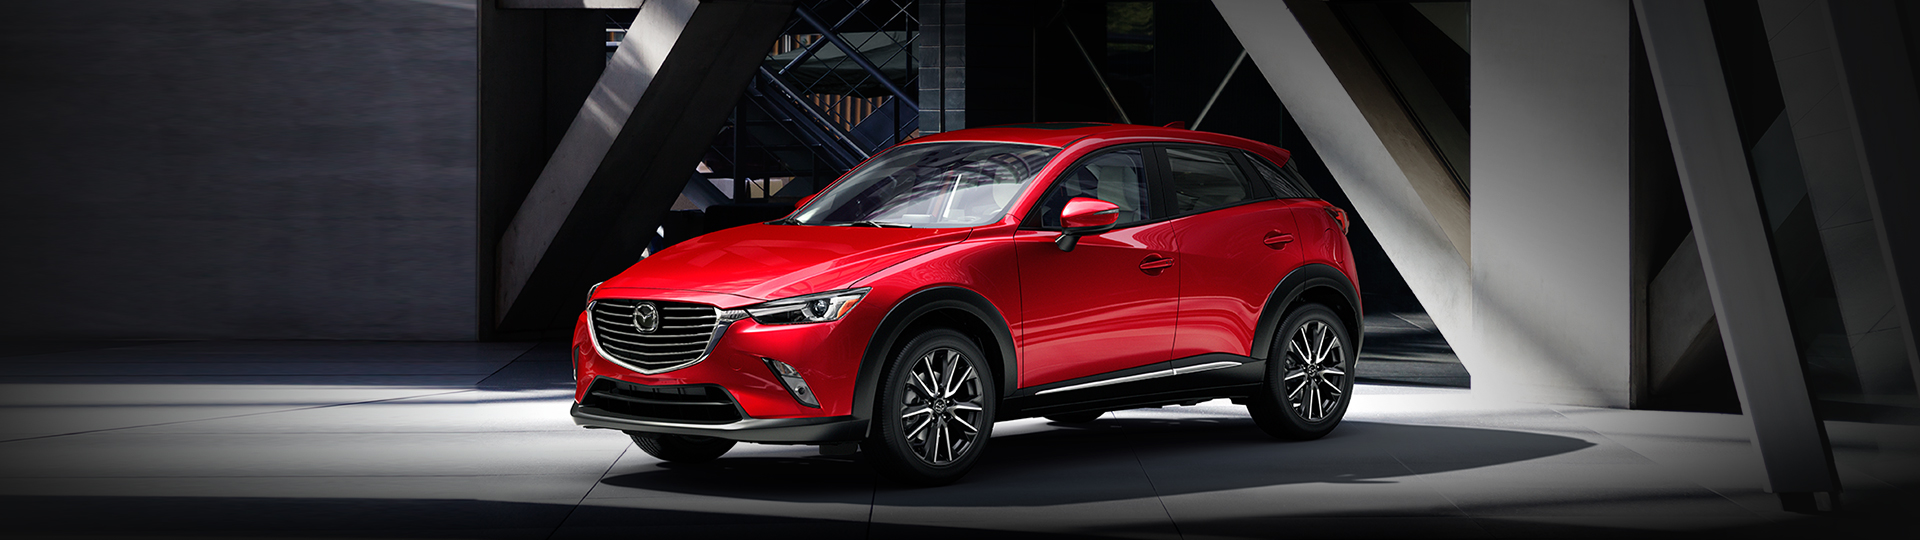 2017-mazda-cx-3-gt-exterior-side-view